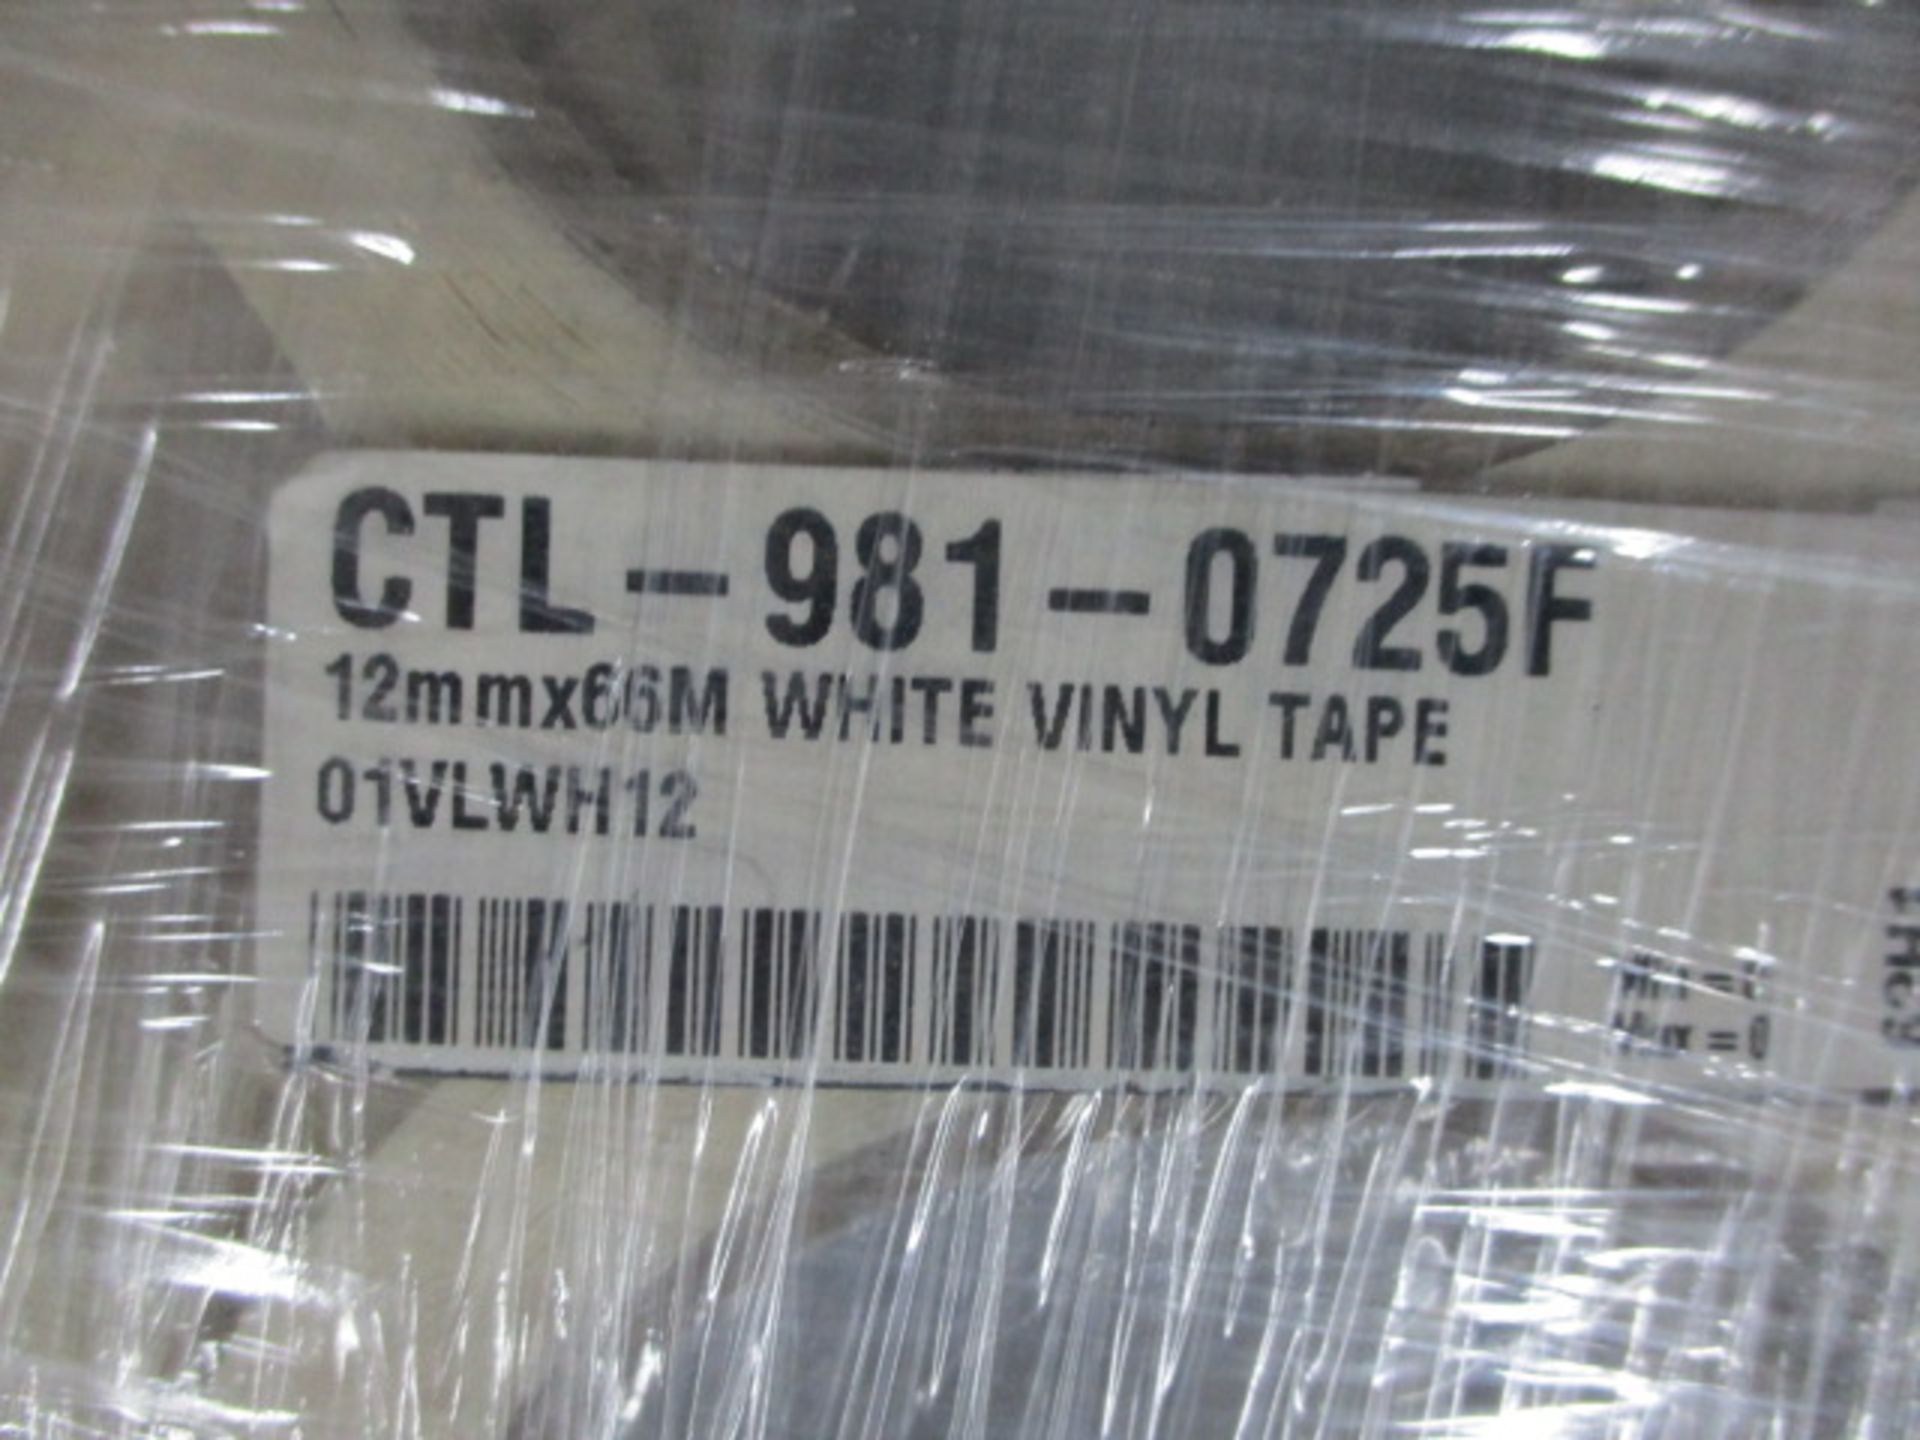 Industrial tape - Image 5 of 10